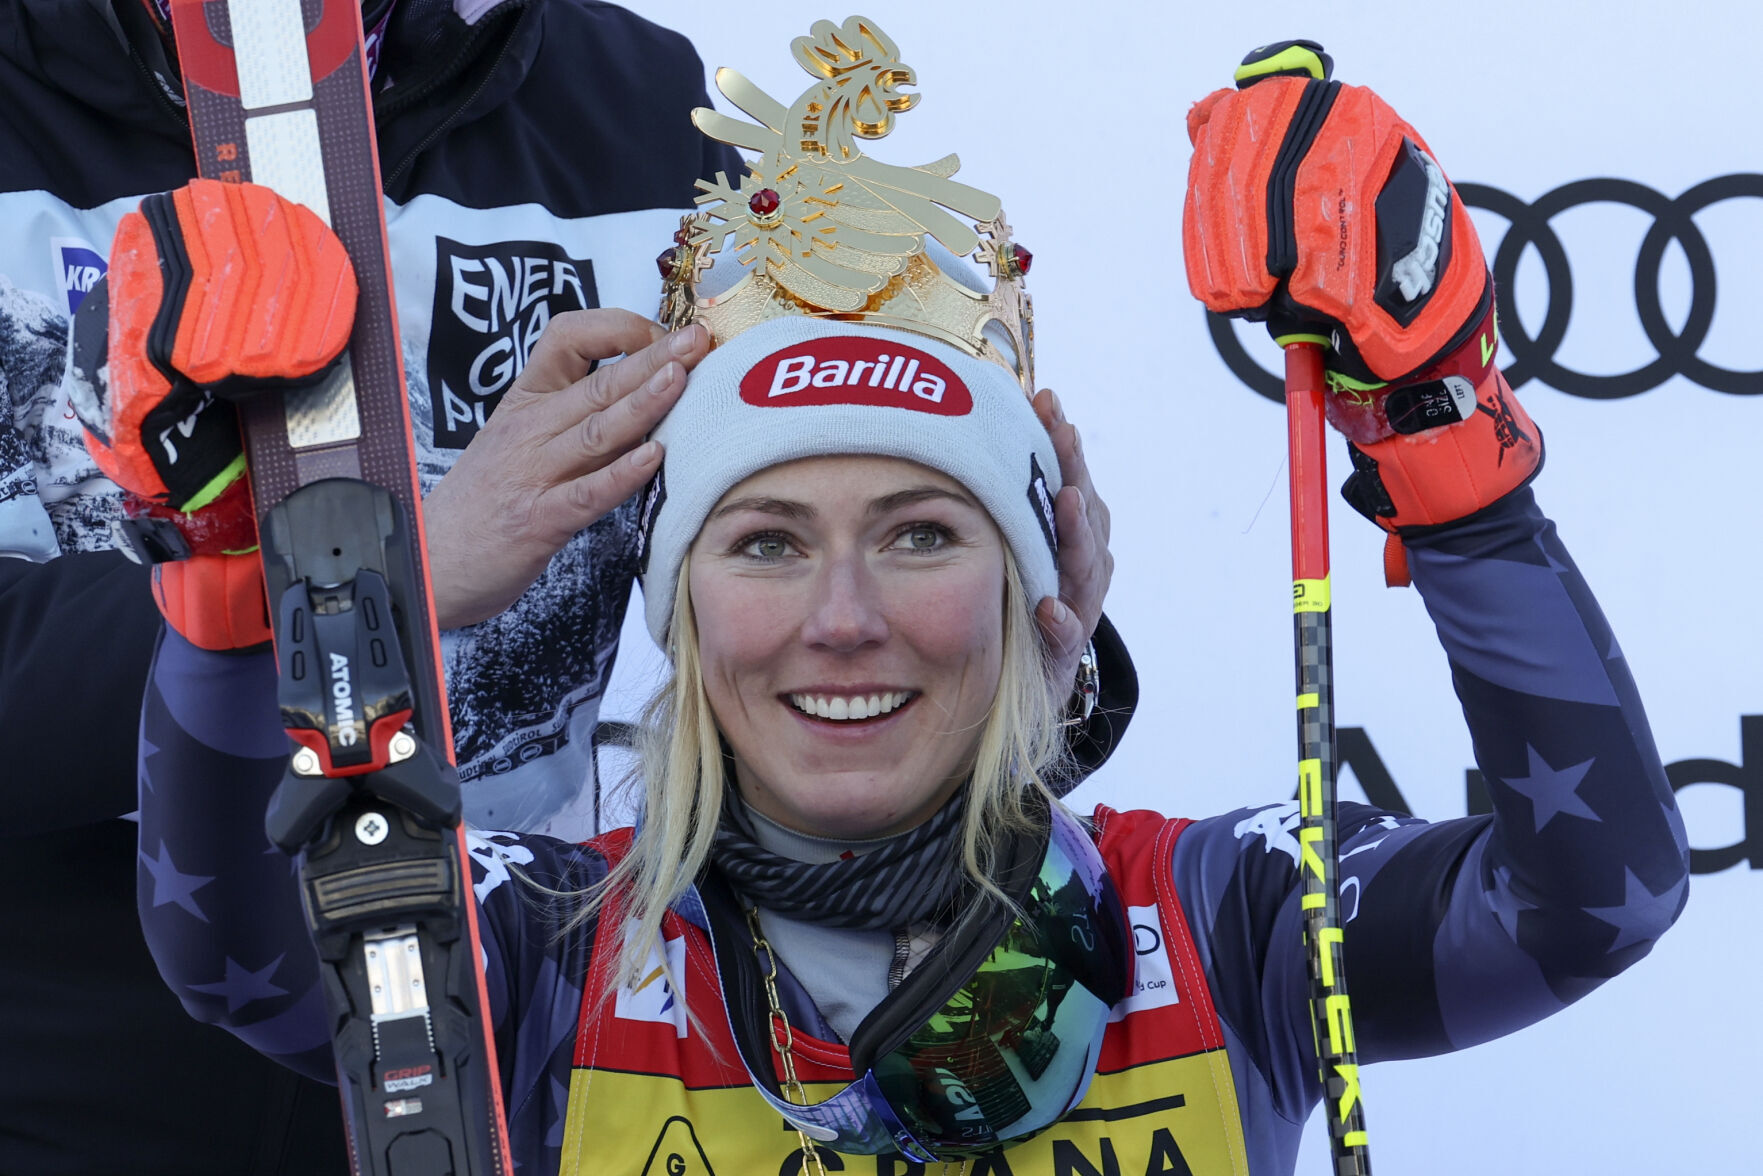 Skier Shiffrin adds to record total with 84th win in another giant slalom